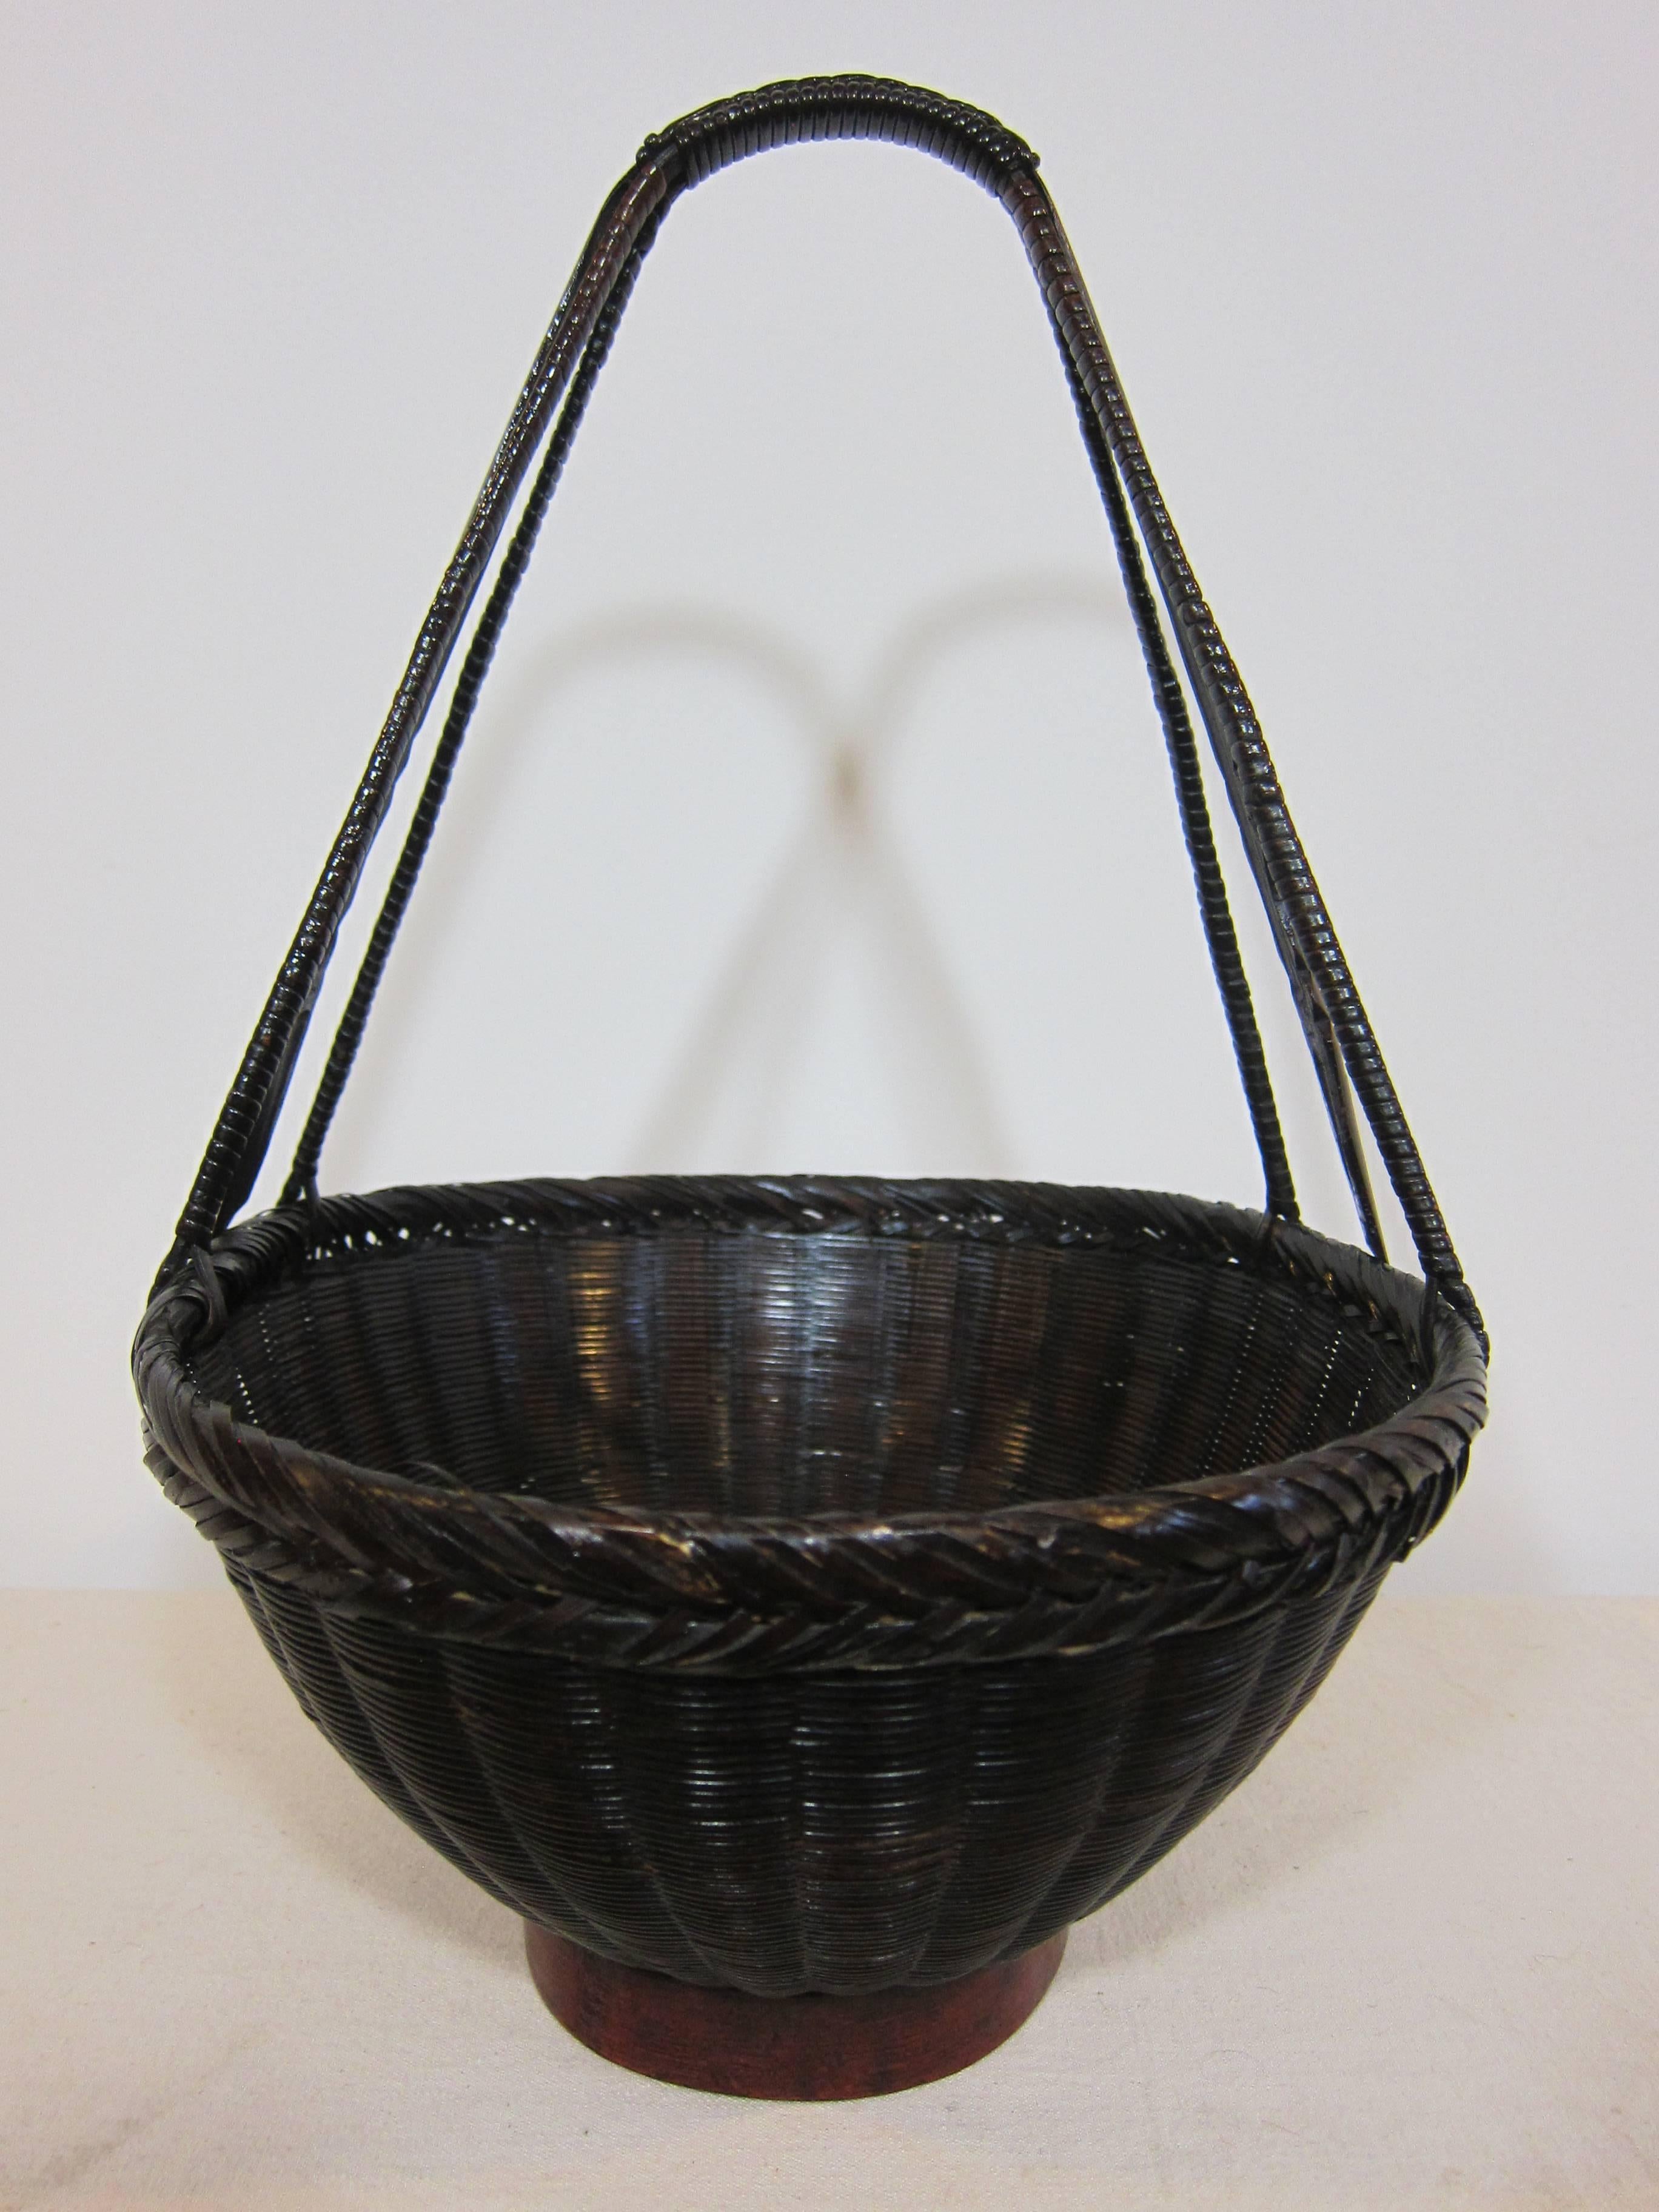 Late 19th Century 19th century Antique Woven Basket For Sale